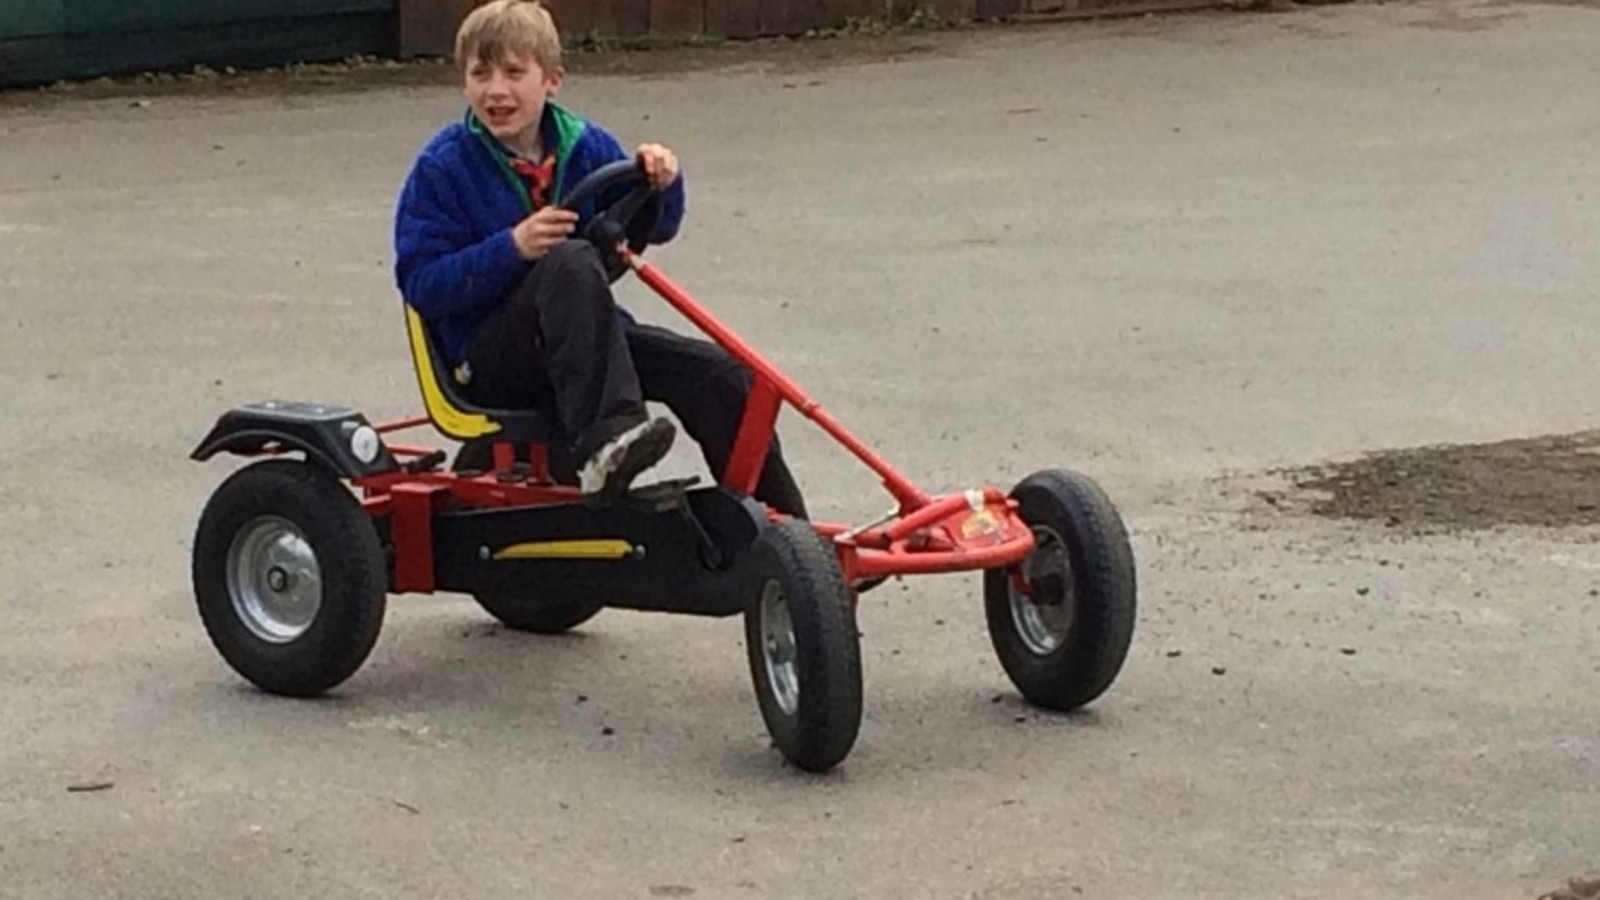 Raywell Park Activities - Pedal Cars